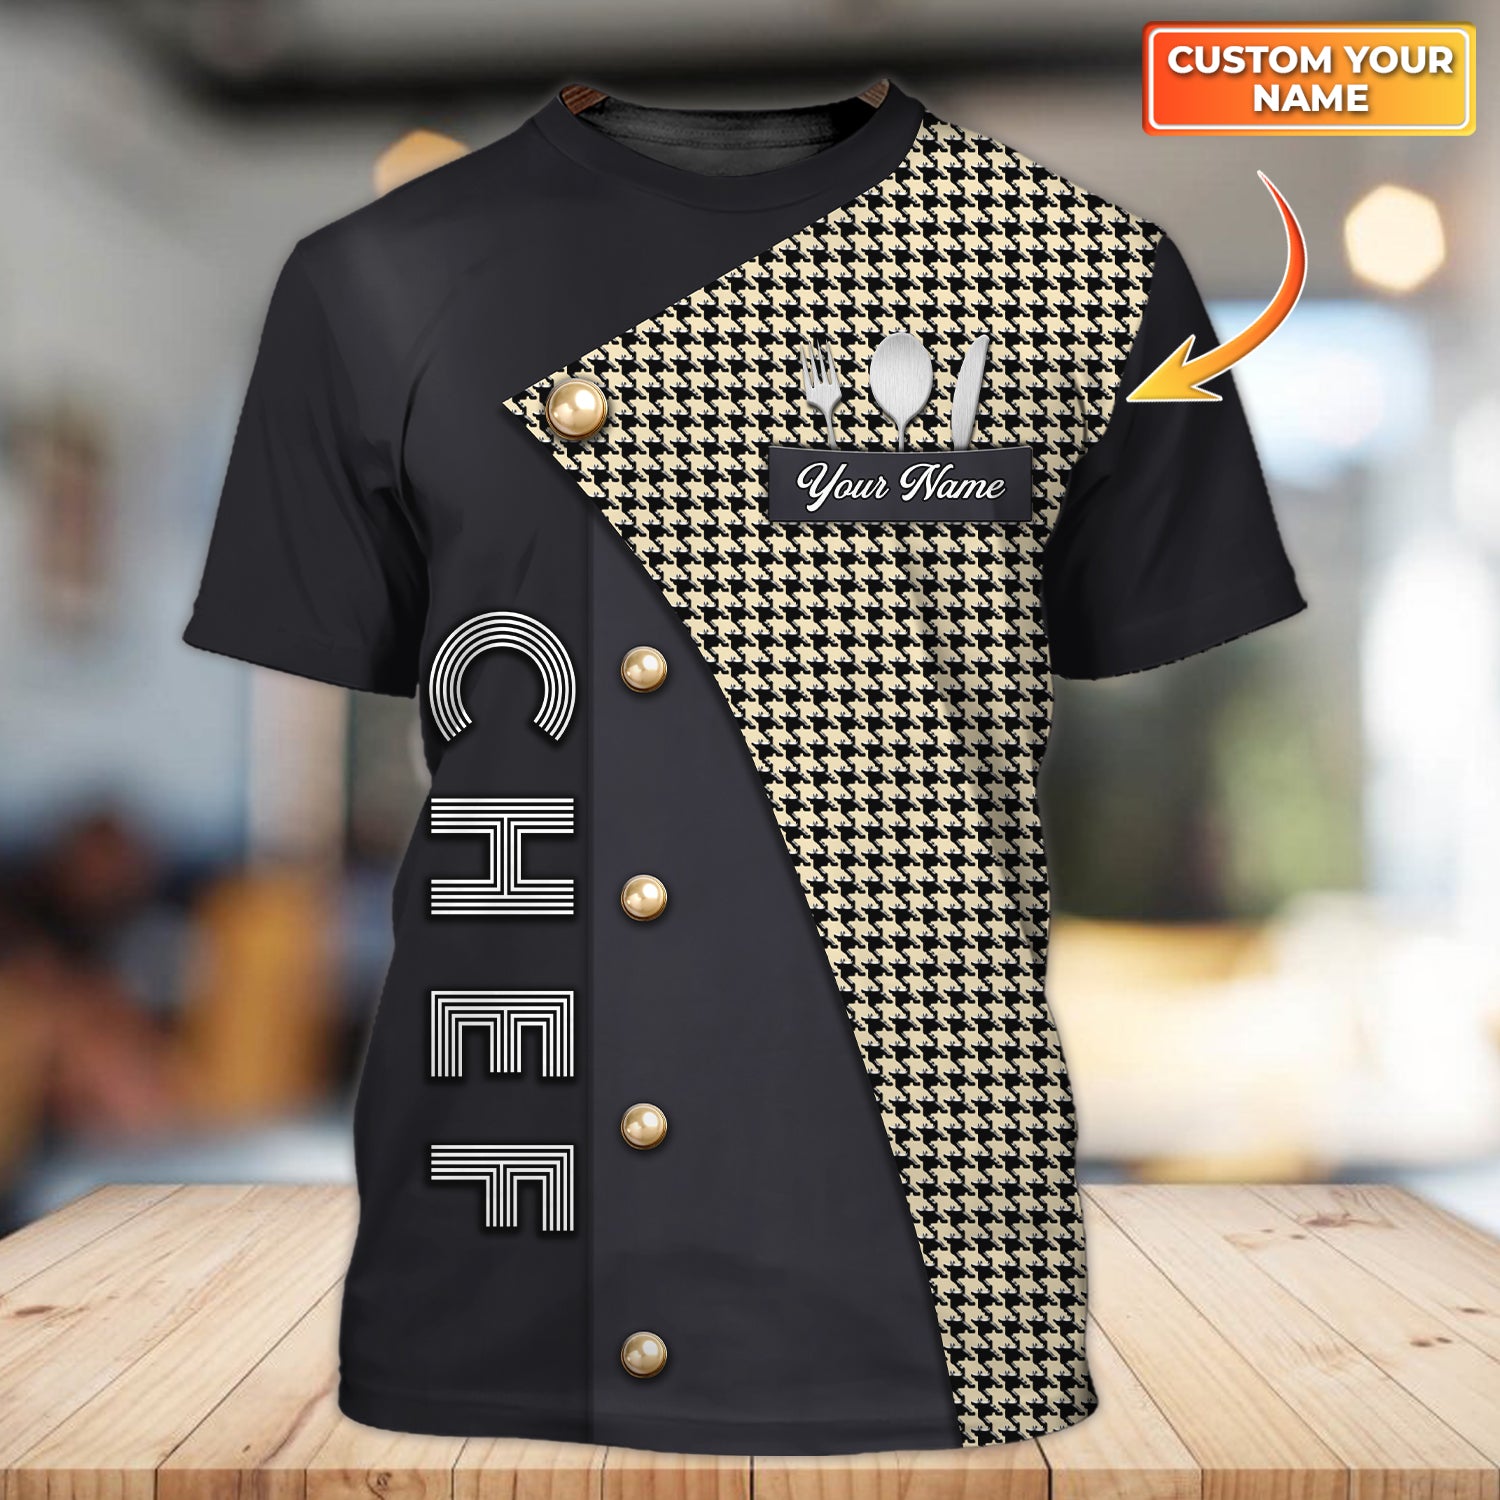 Chef- Personalized Name 3D Tshirt -TD96-1164 (Non Workwear)